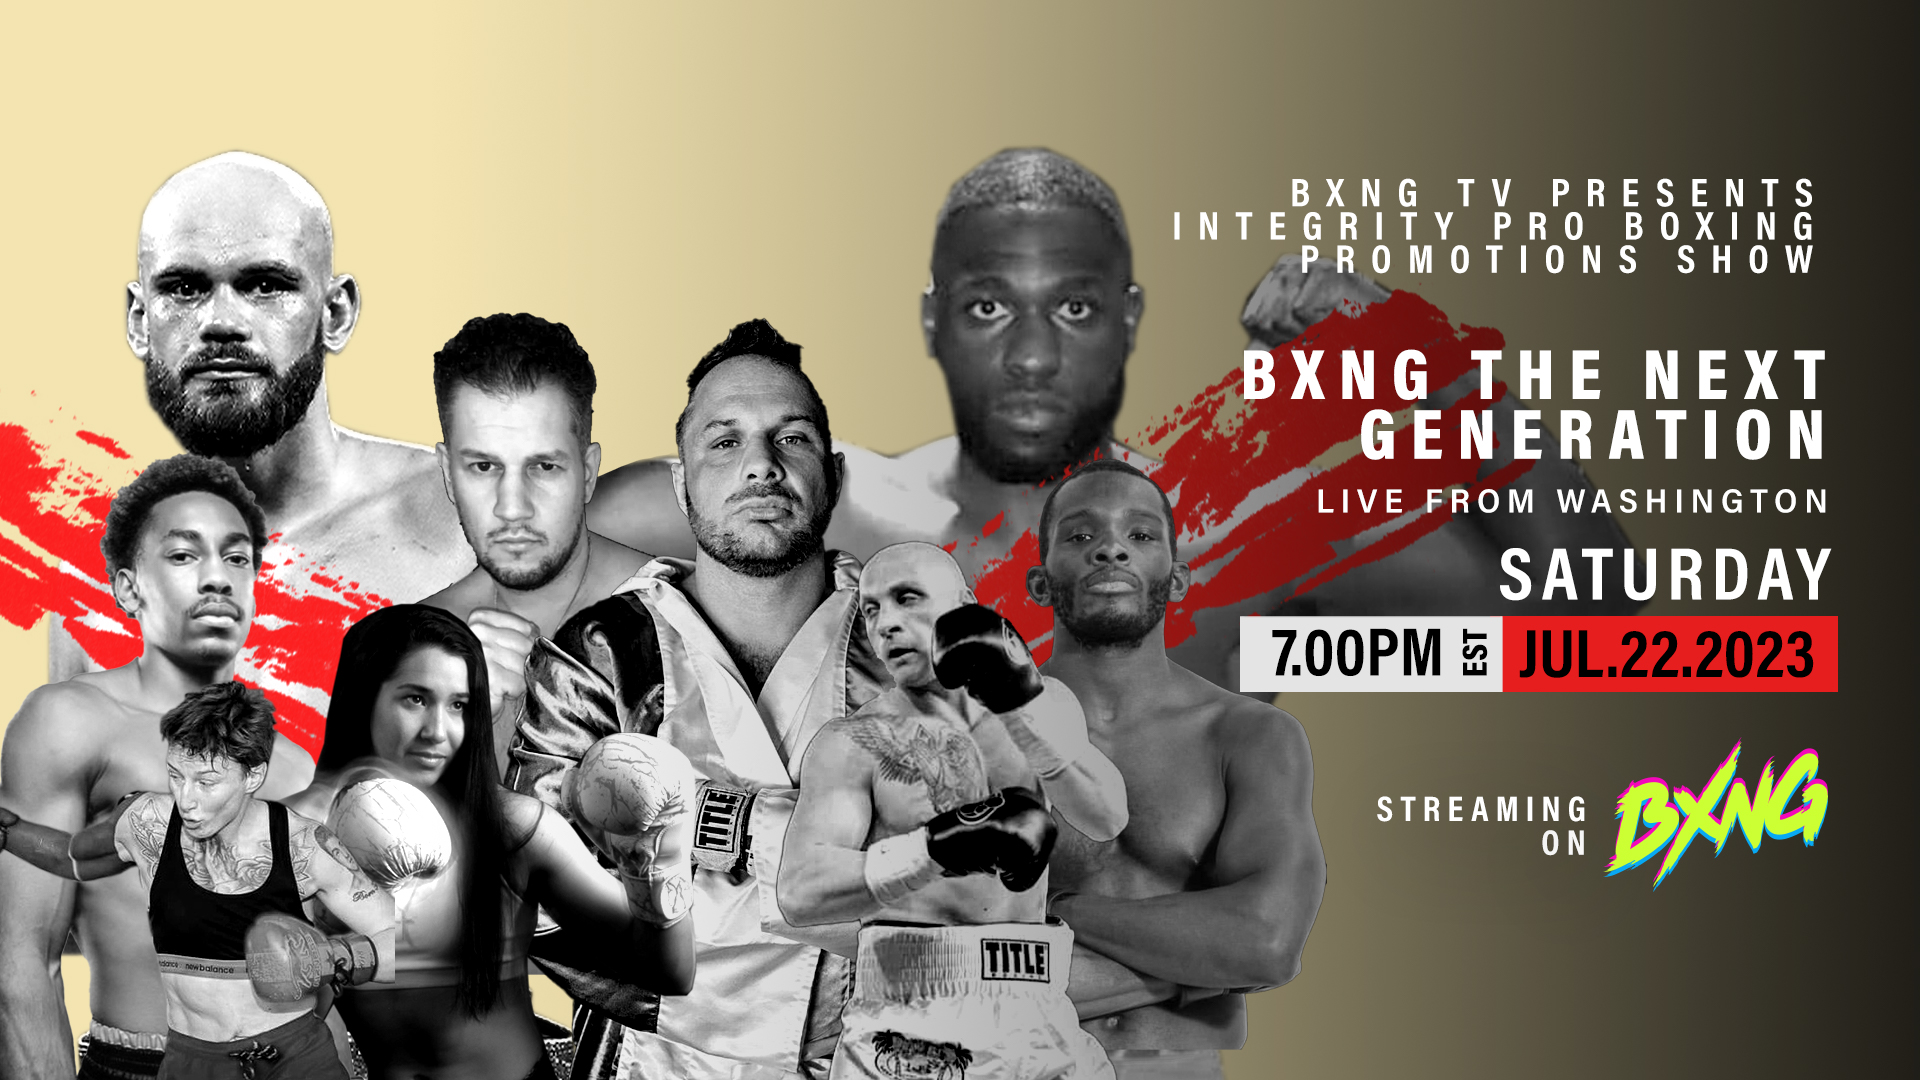 BXNG TV Presents Integrity Pro Boxing Promotions Show Live Stream 07/22/23 